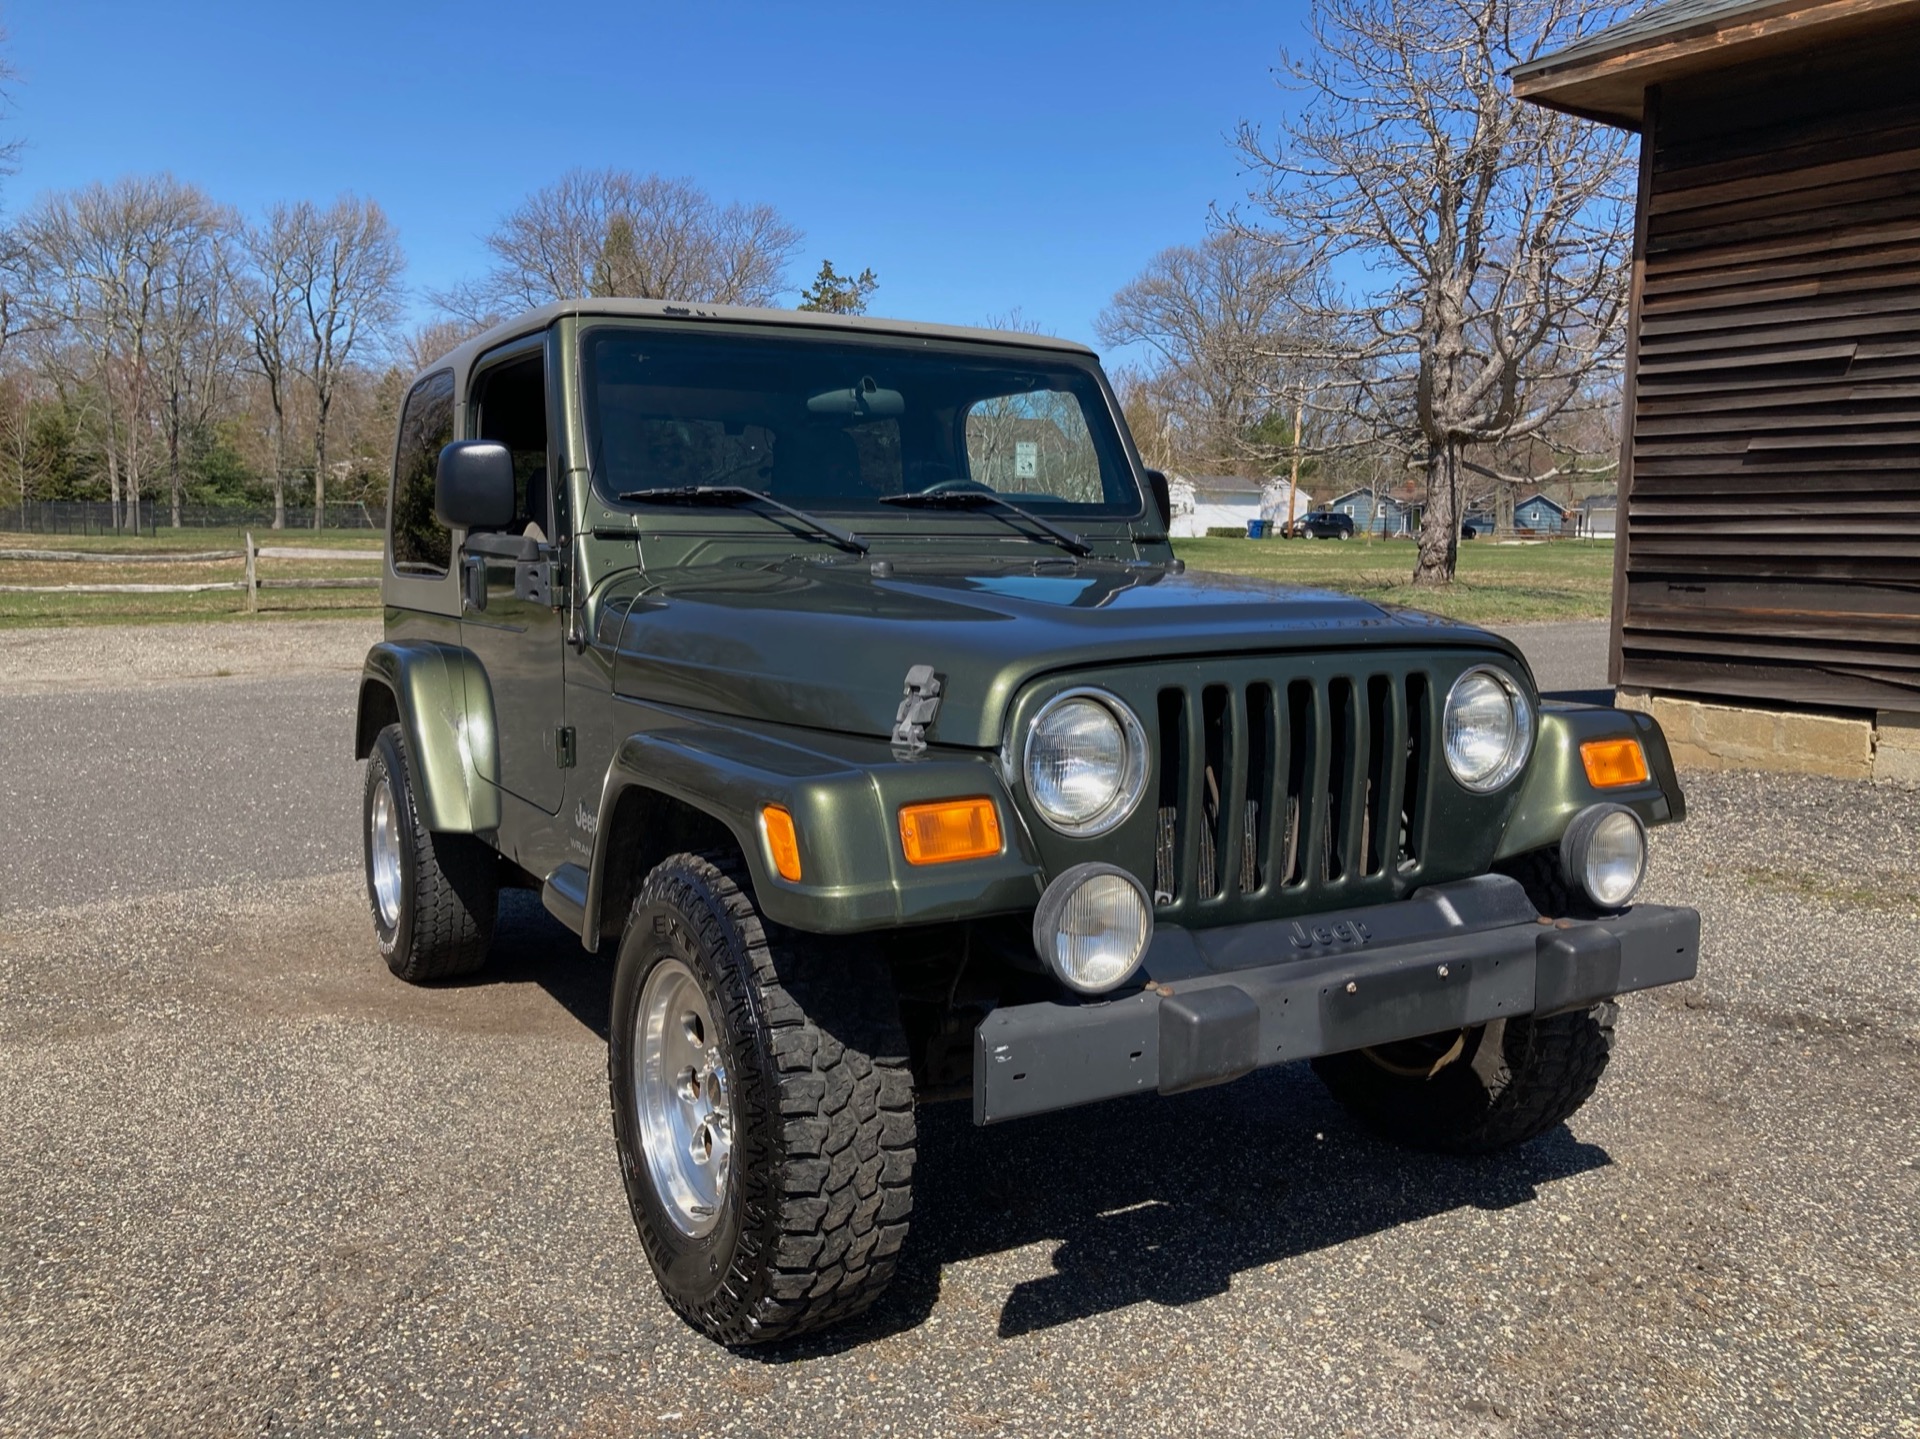 Used 2006 Jeep Wrangler 65th Anniversary Edition X For Sale ($13,900) | Legend Leasing Stock #60258 2006 Jeep Wrangler 65th Anniversary Edition Specs